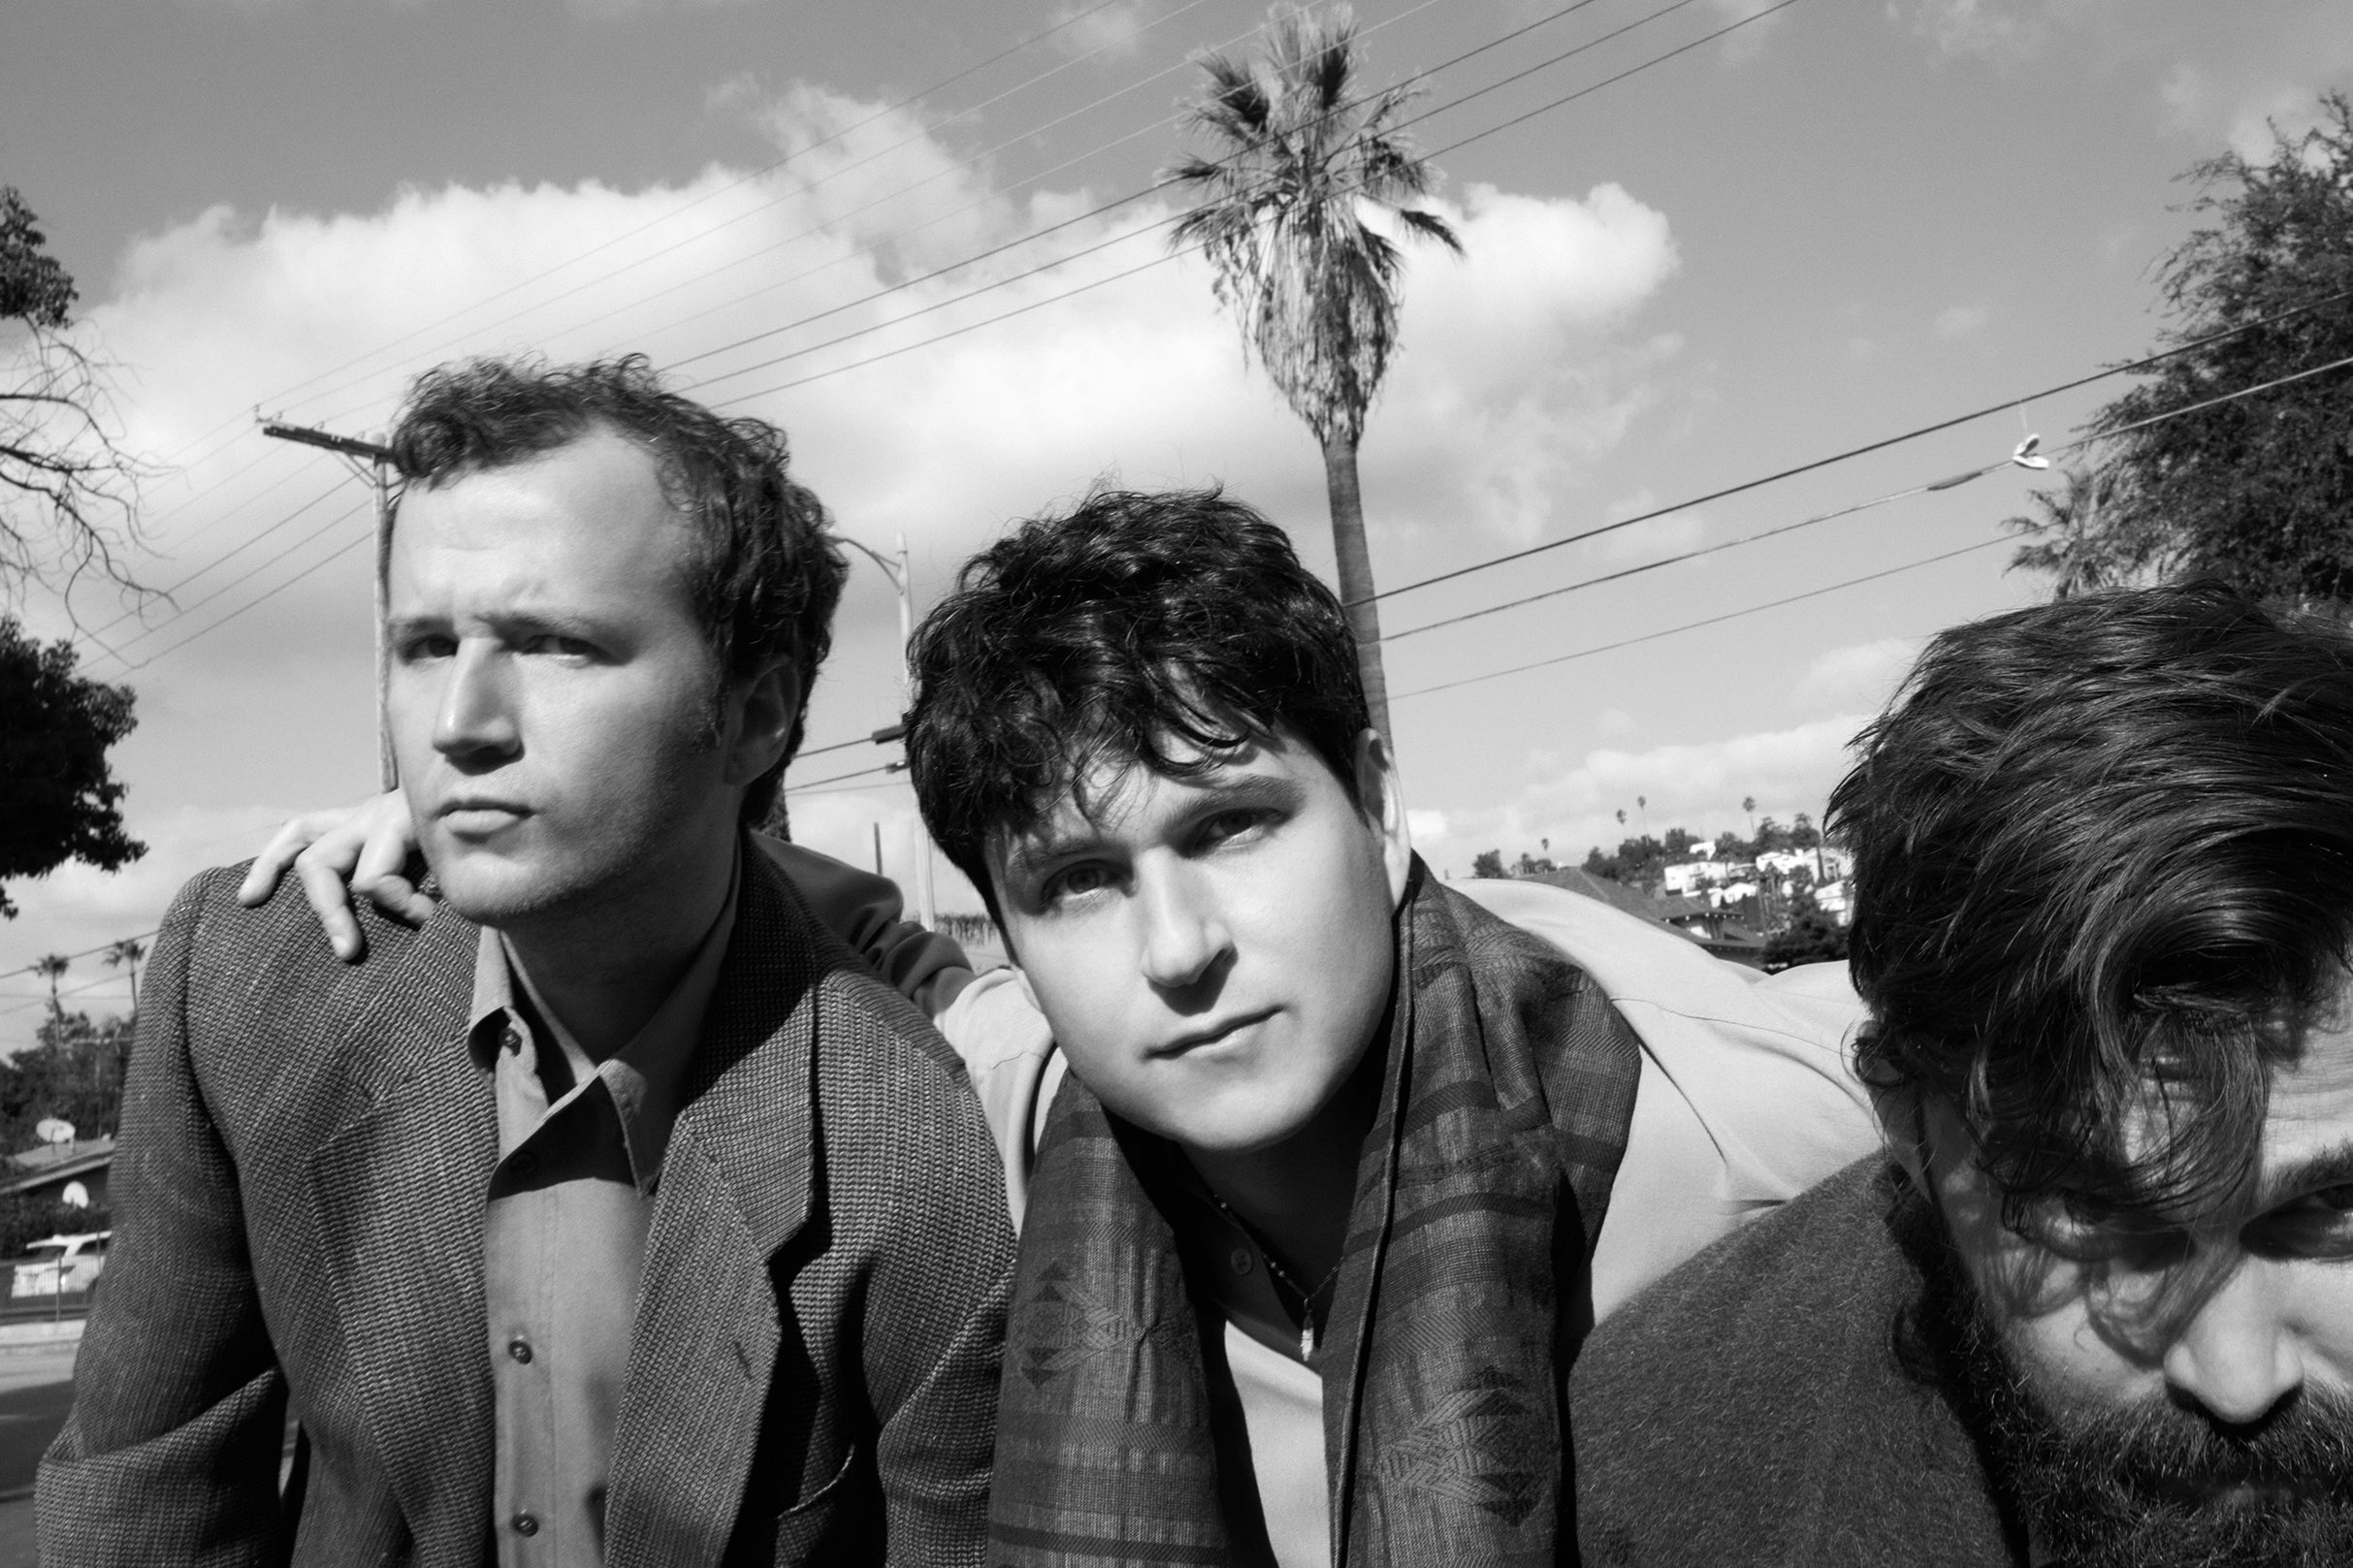 new presale password for Vampire Weekend - 'Only God Was Above Us' Tour presale tickets in Kansas City